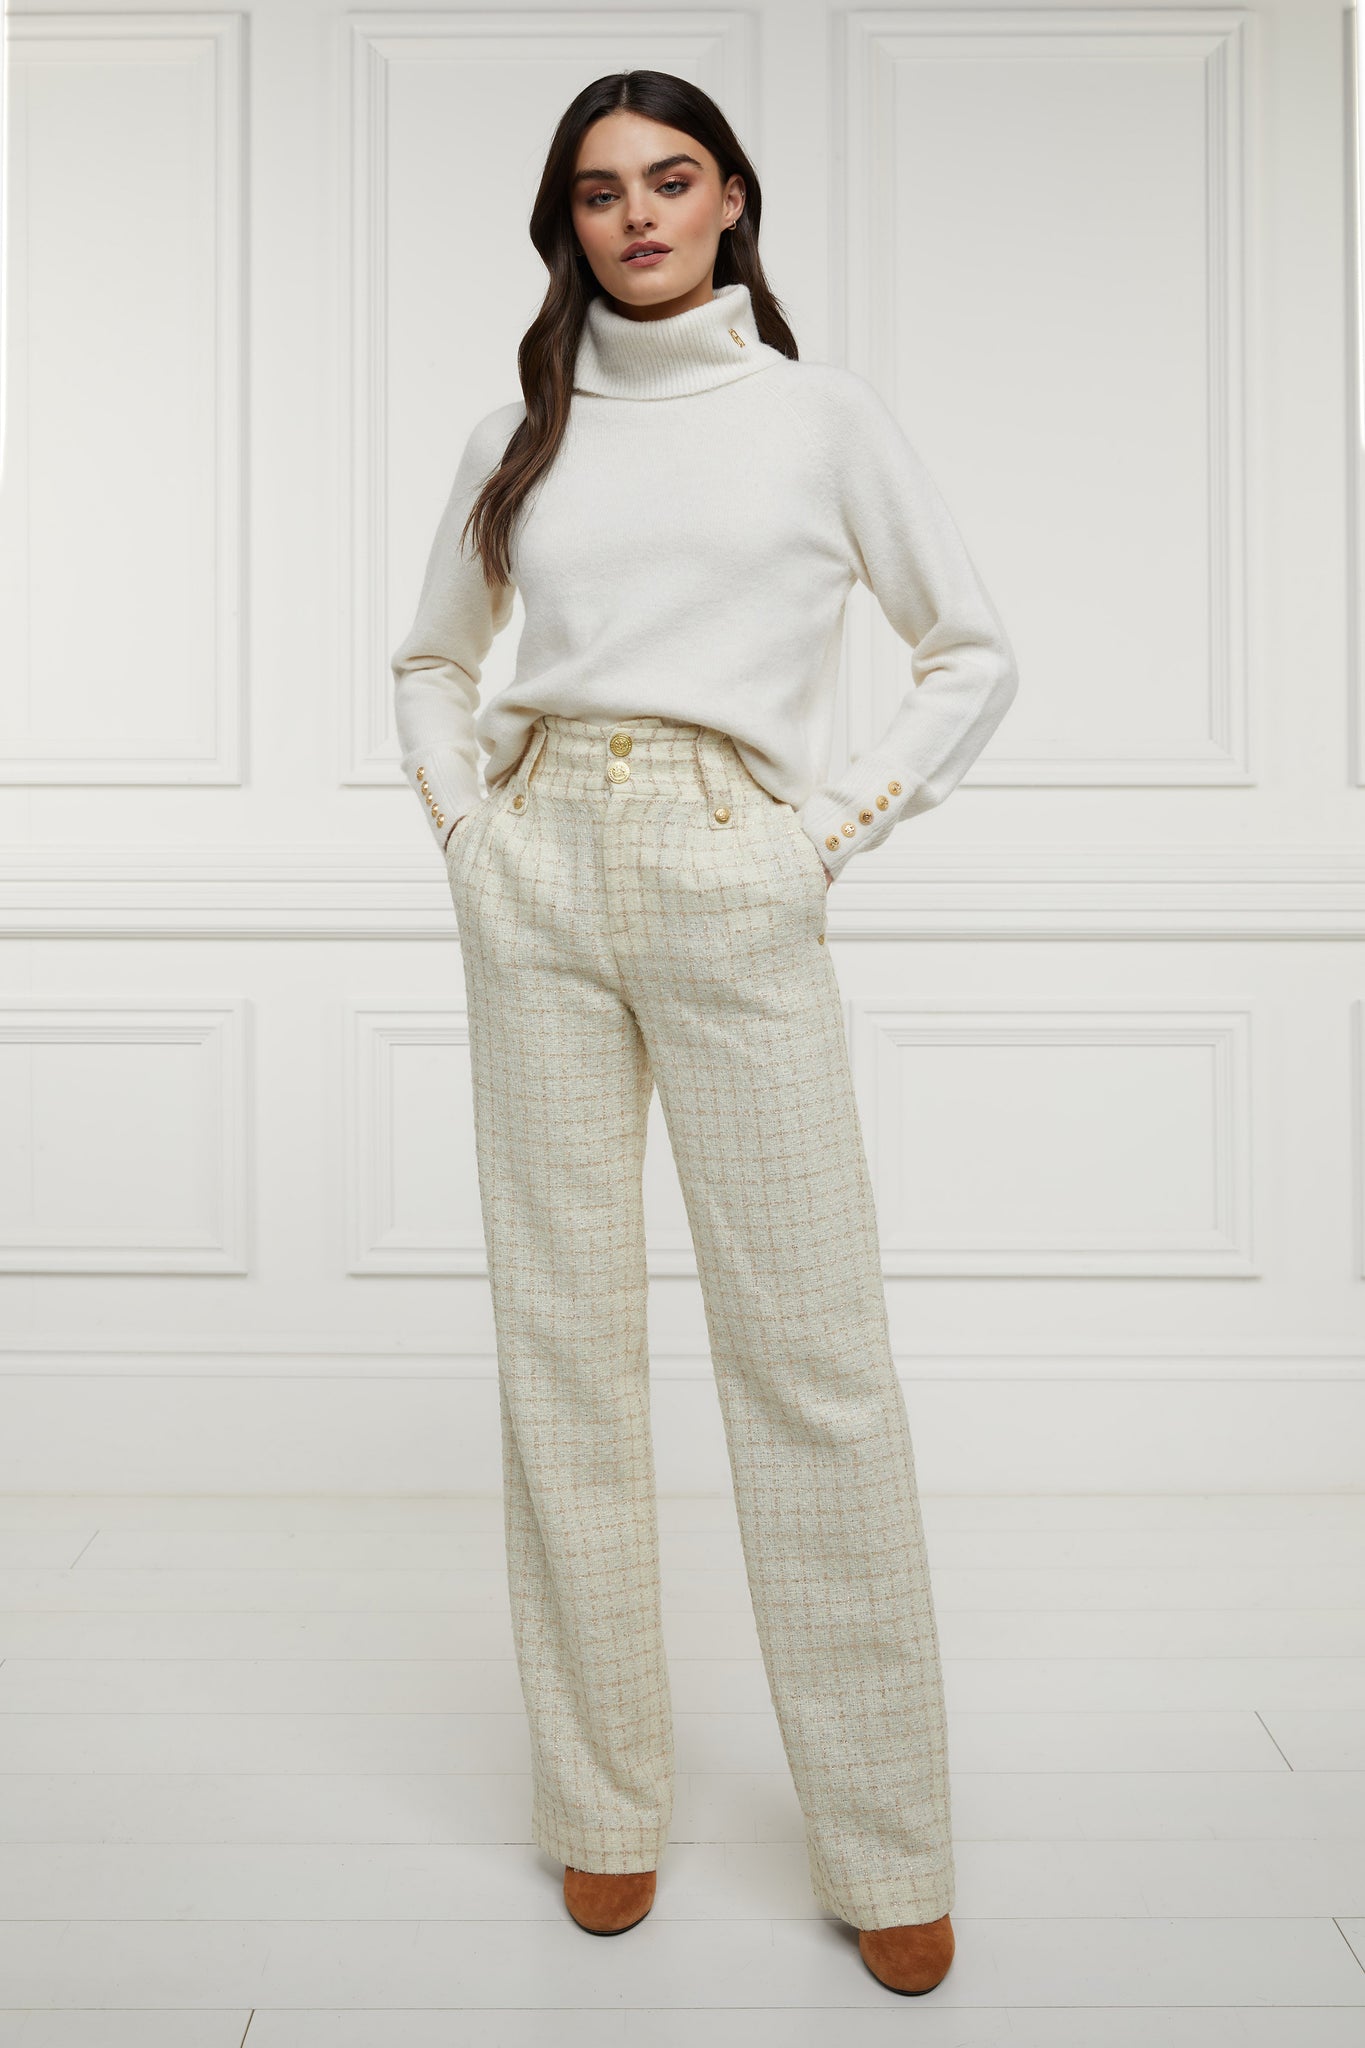 The Ivory Sparkle Tweed Suit